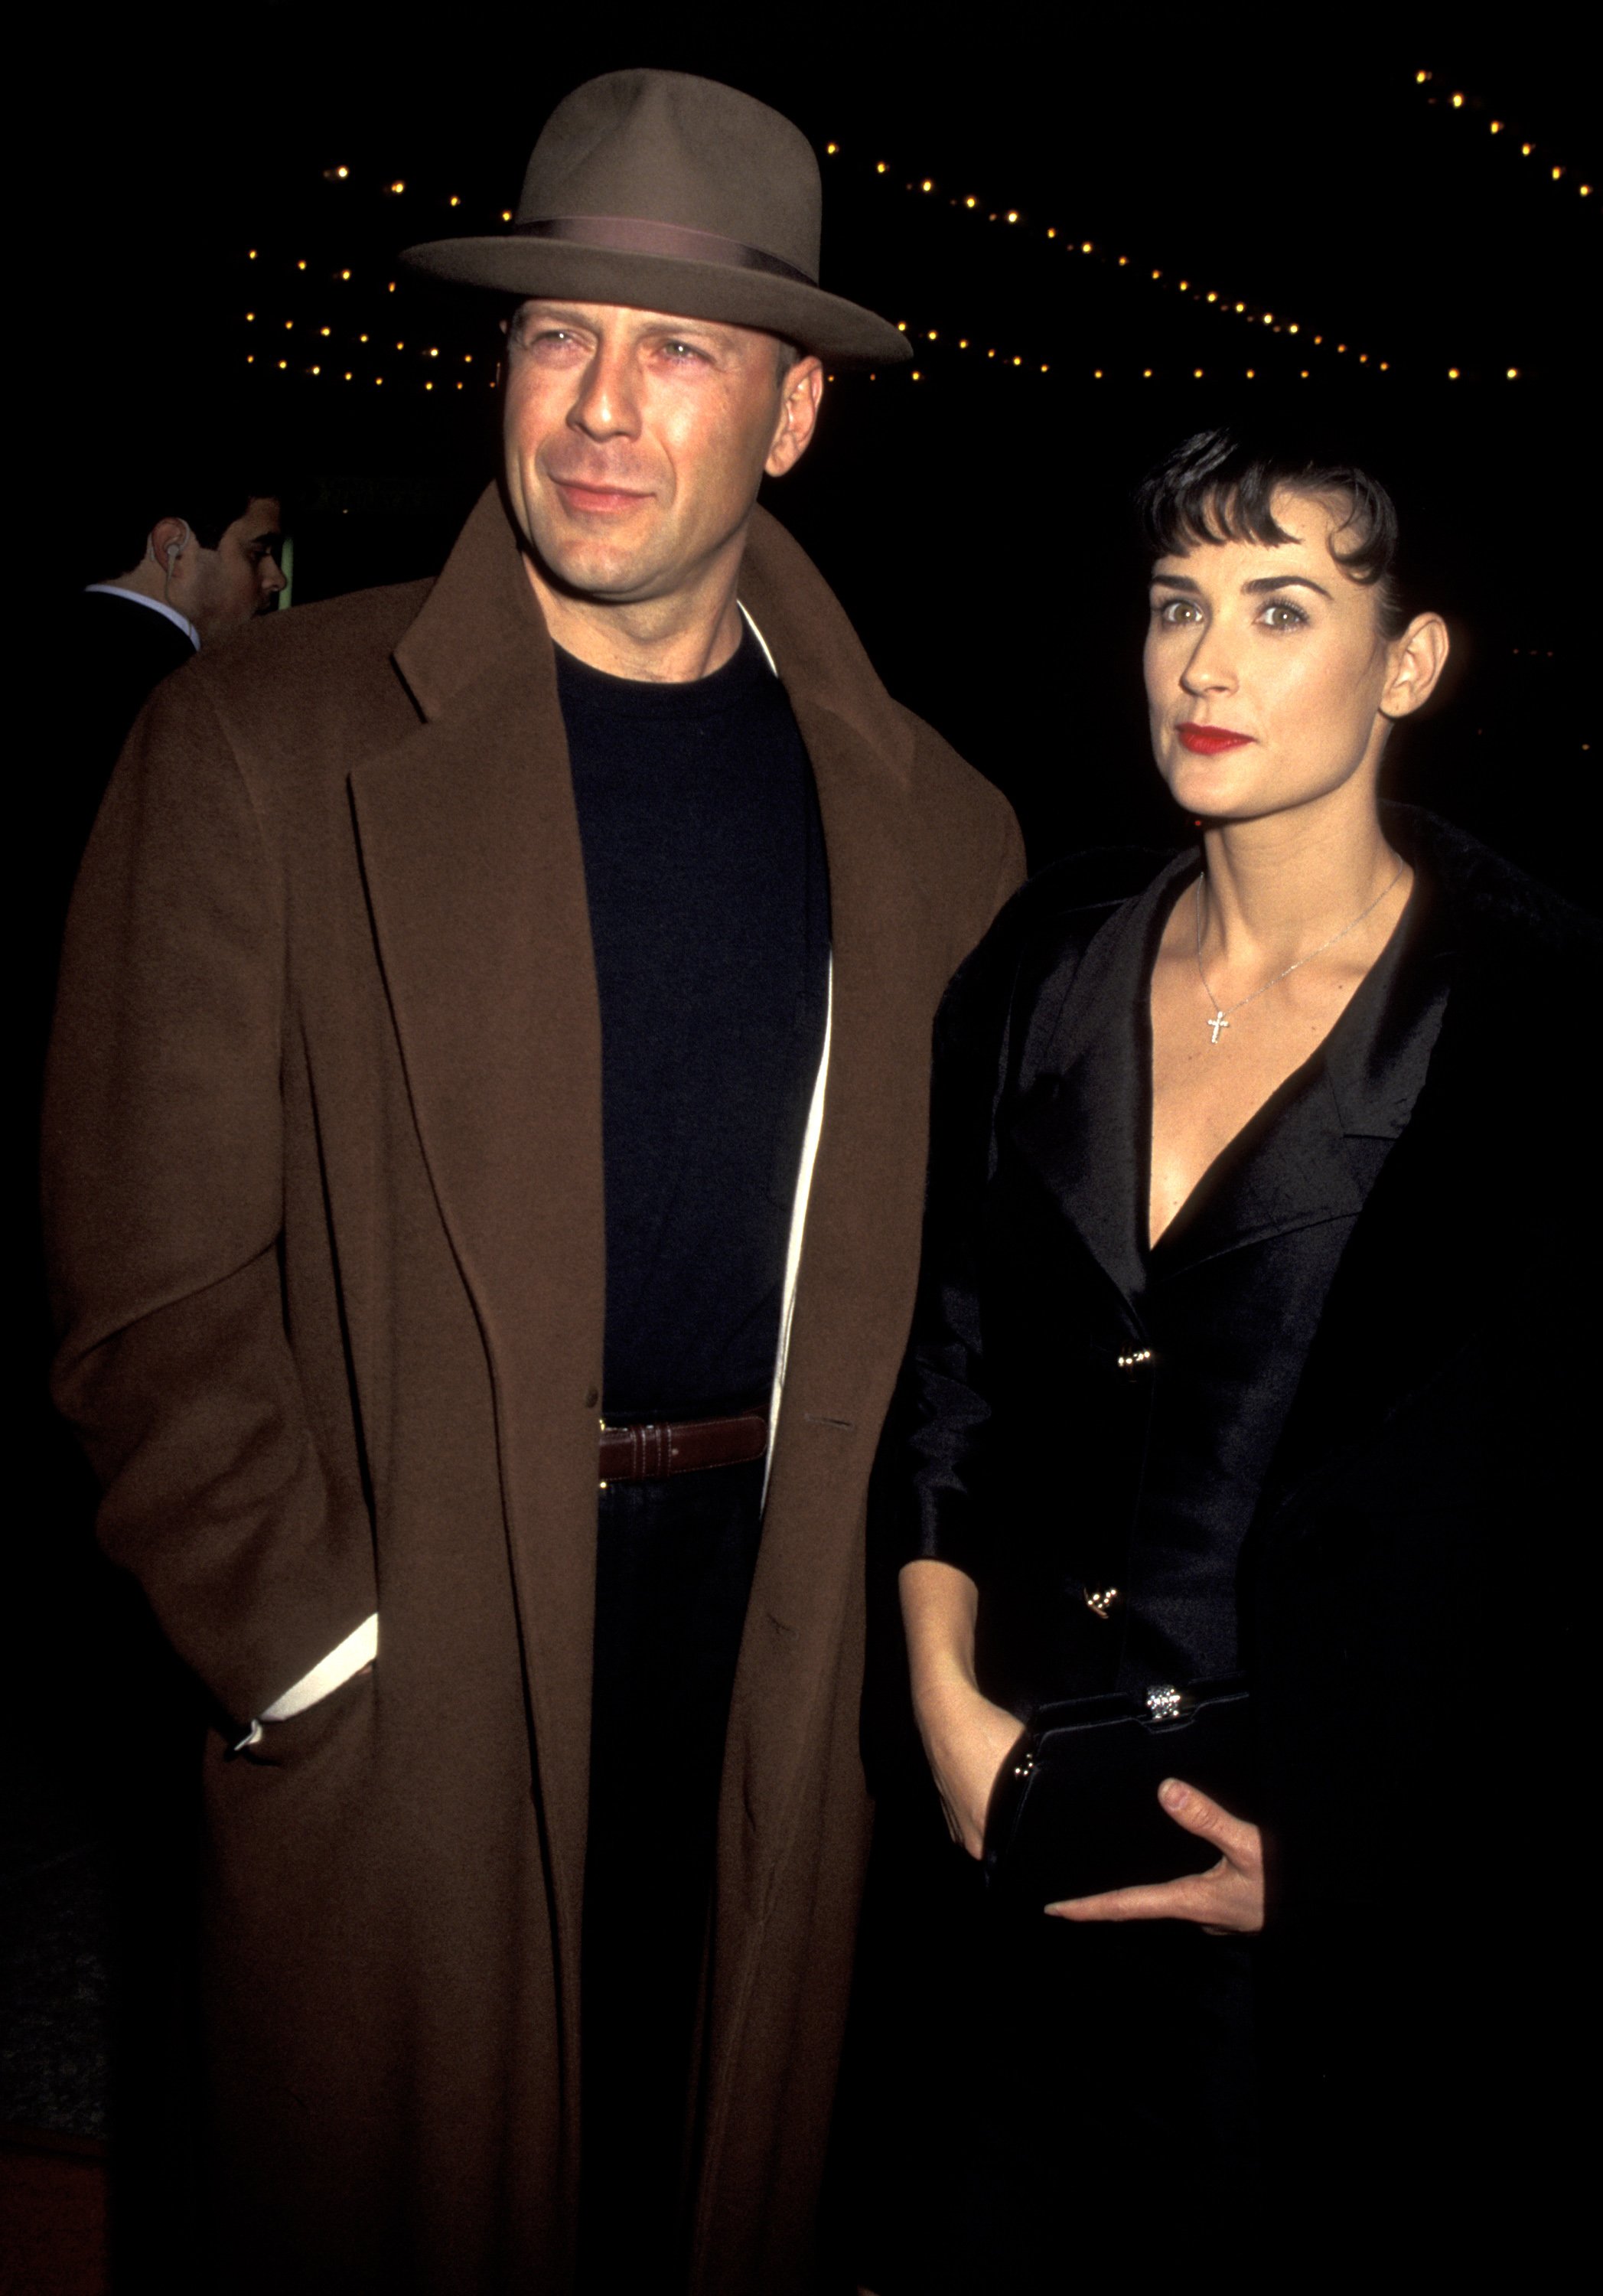 Bruce Willis and Demi Moore during "The Juror" Los Angeles premiere. / Source: Getty Images